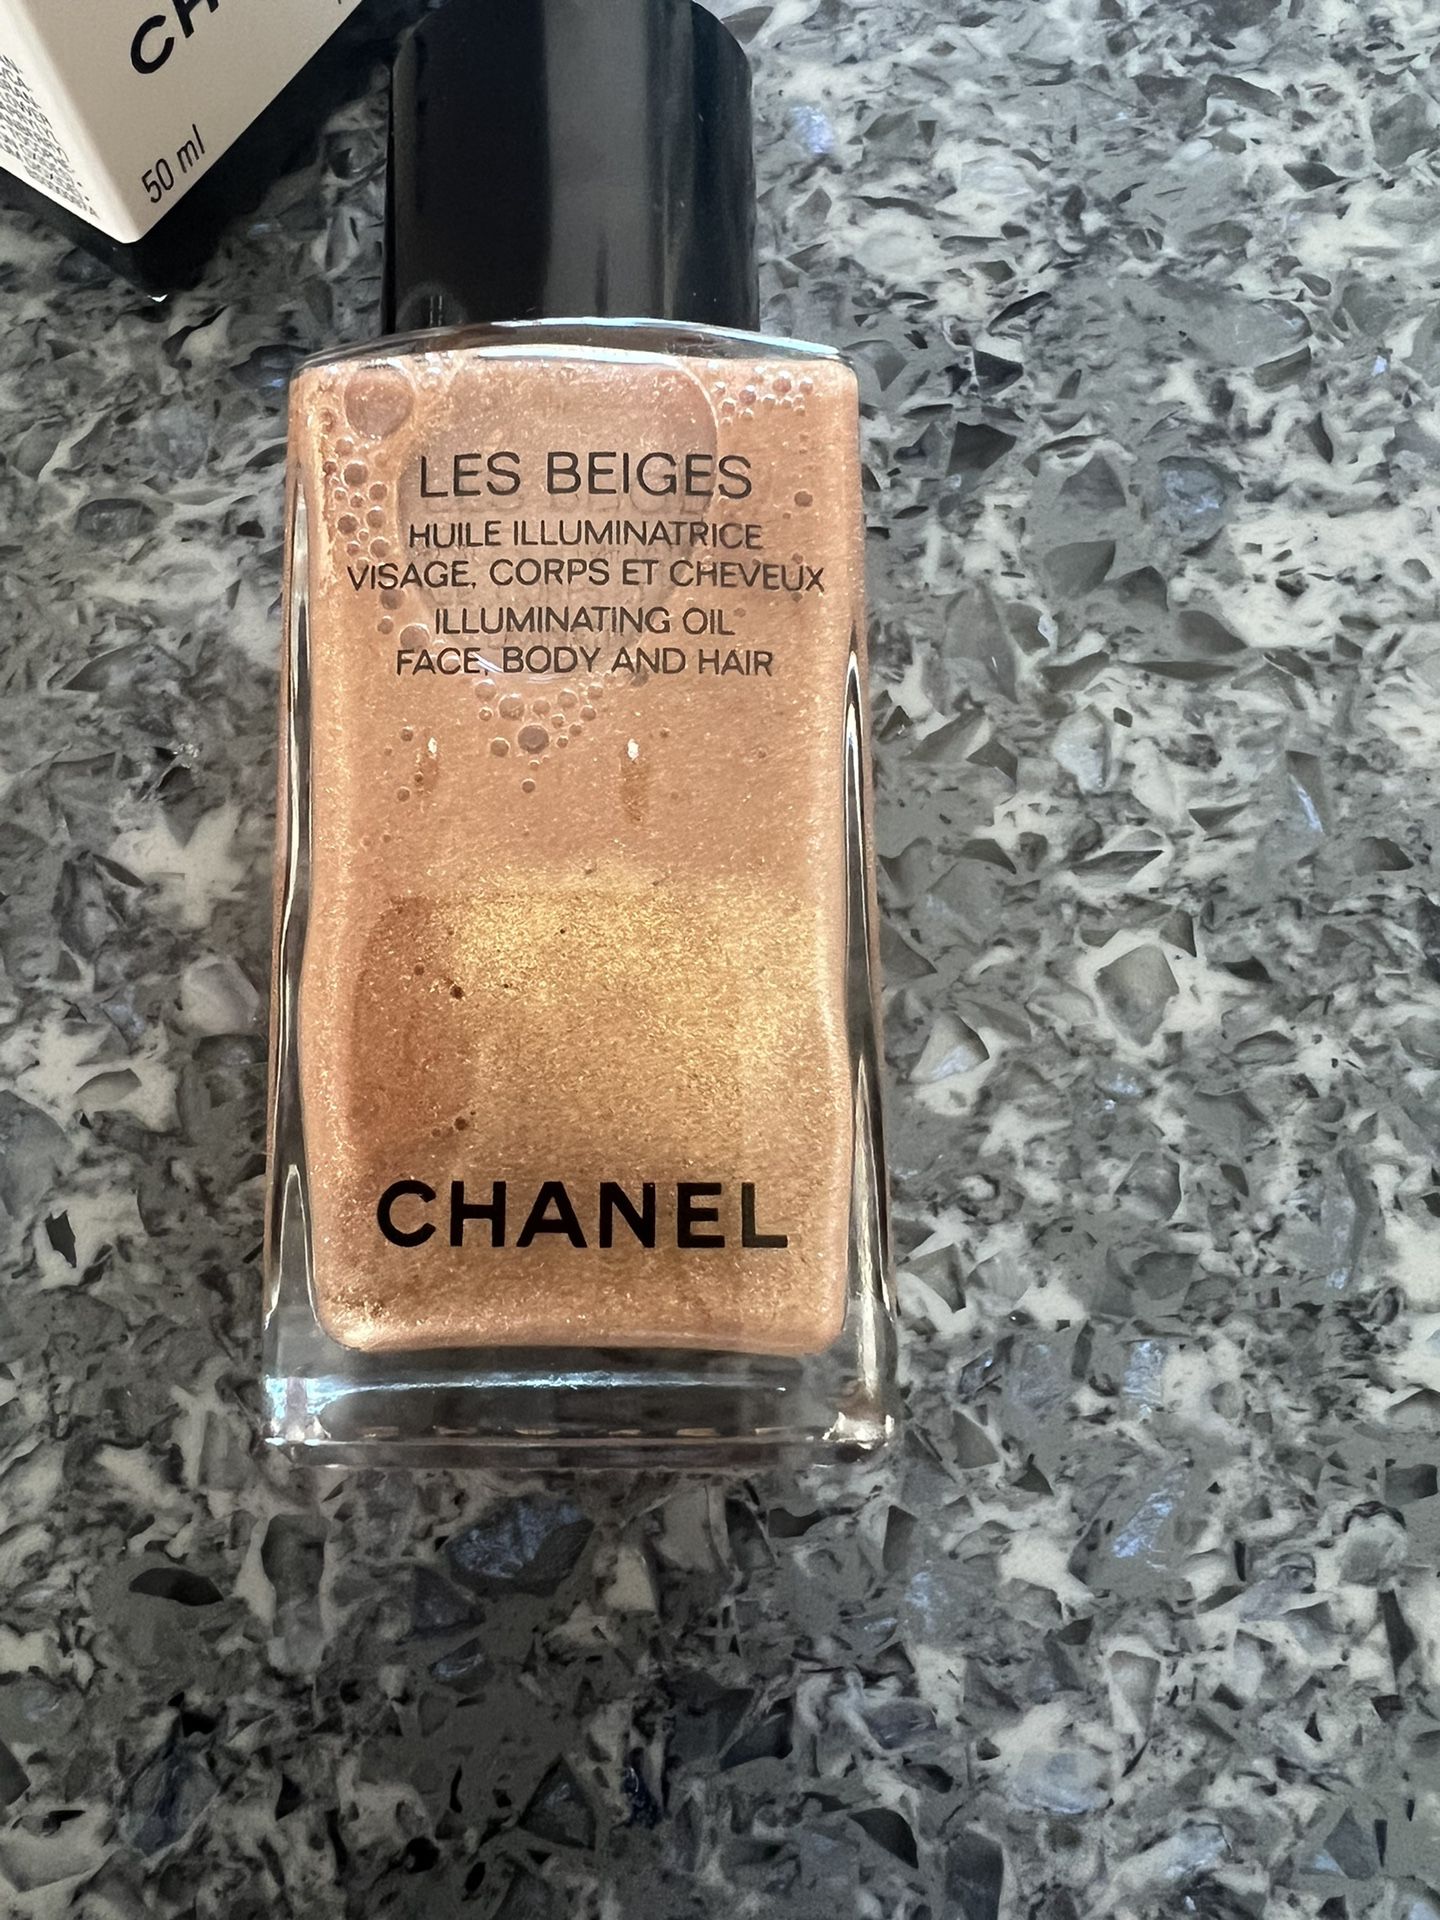 Chanel Las Beiges Illuminating Oil Face, Body And Hair